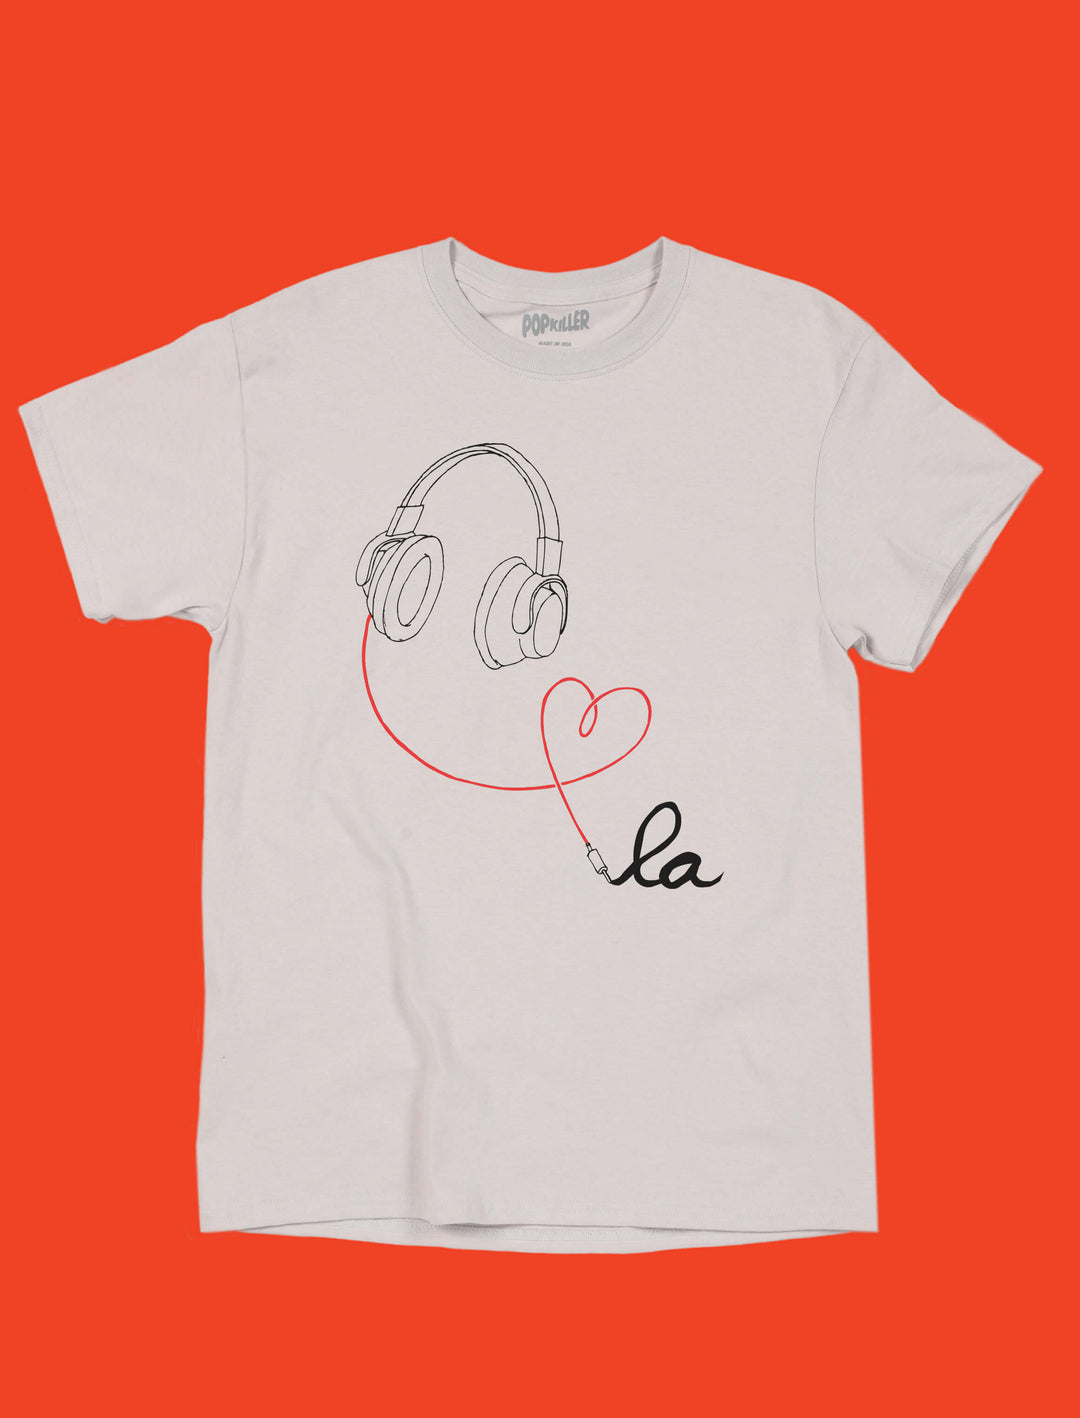 Los Angeles music fanatic ice grey color t-shirt.